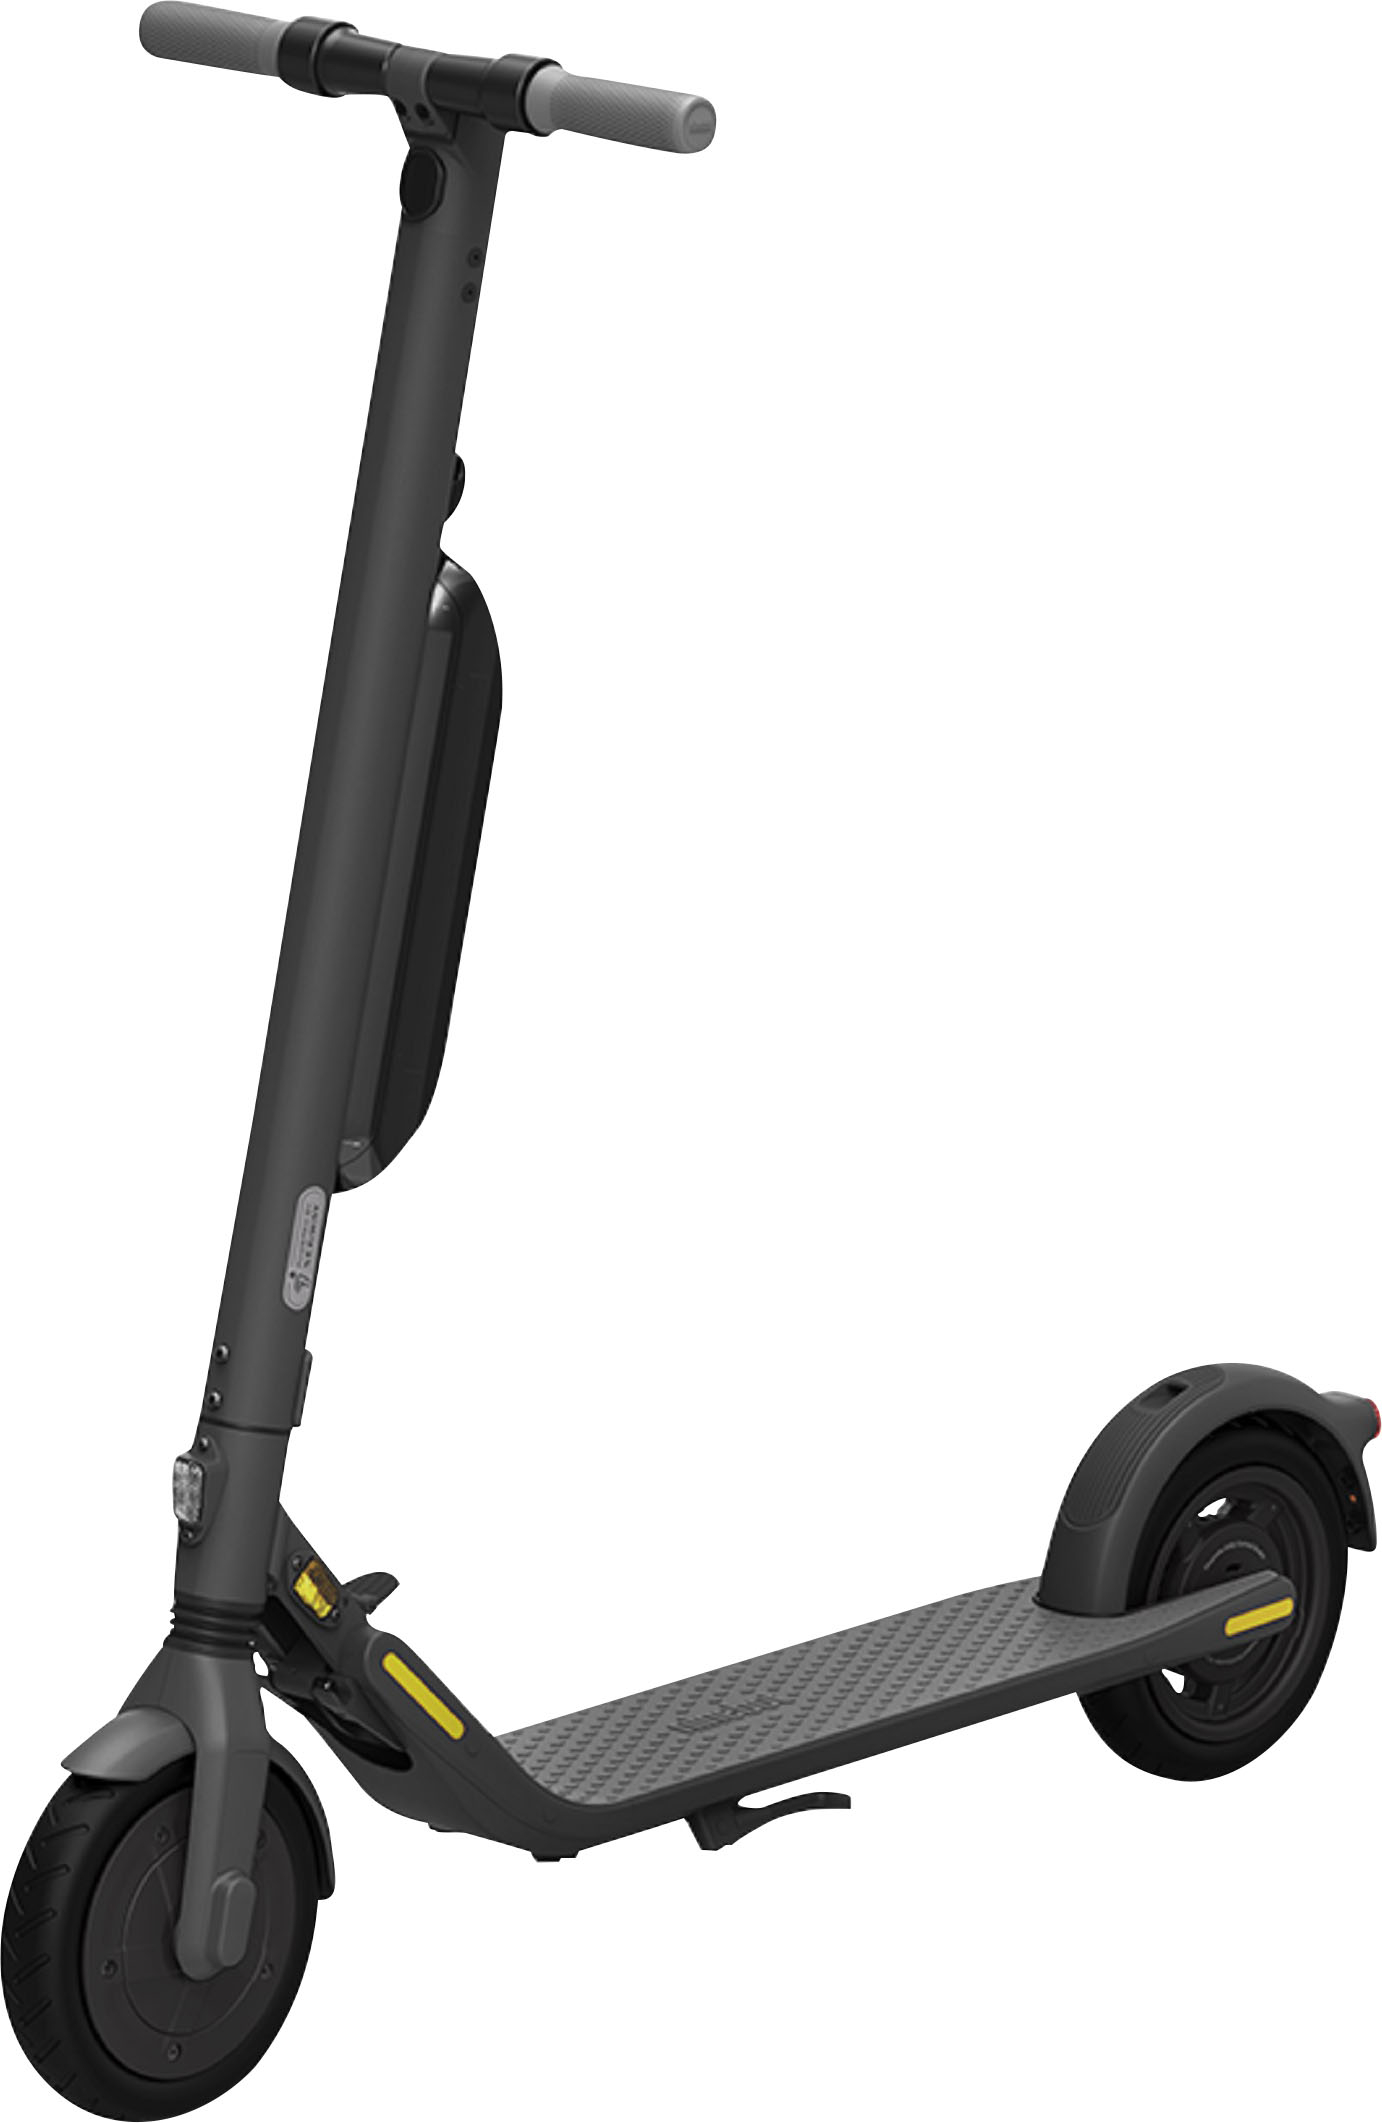 How Does the Range of Segway Ninebot Scooters Vary Across Different Models  